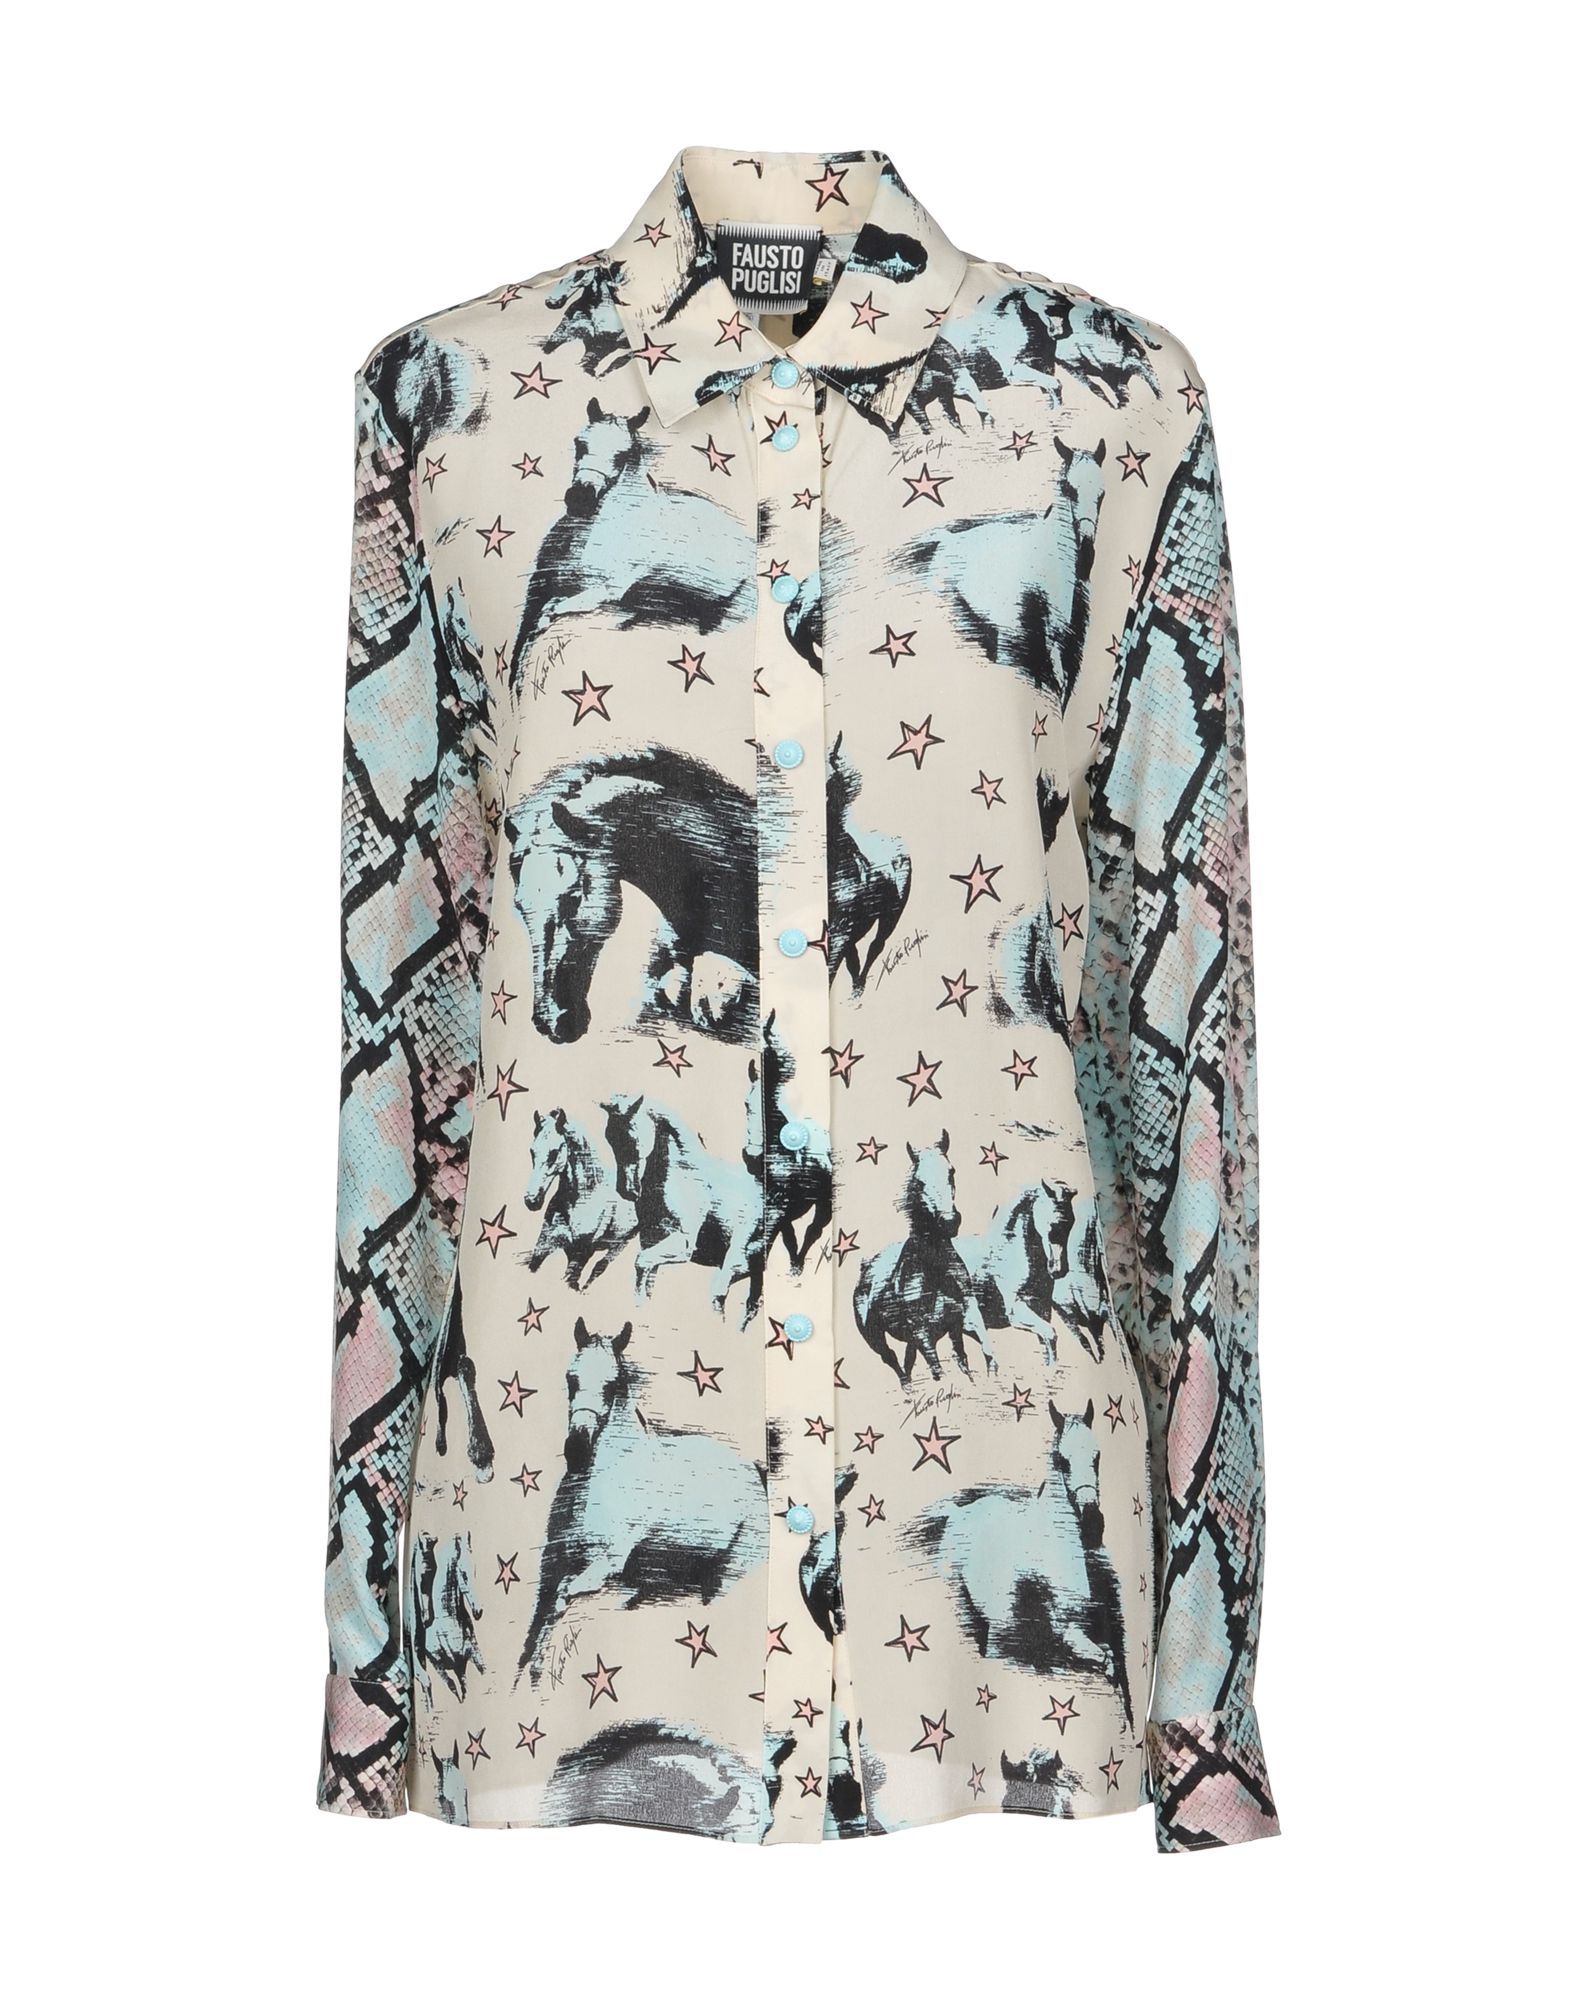 FAUSTO PUGLISI Patterned shirts & blouses,38747261JV 4